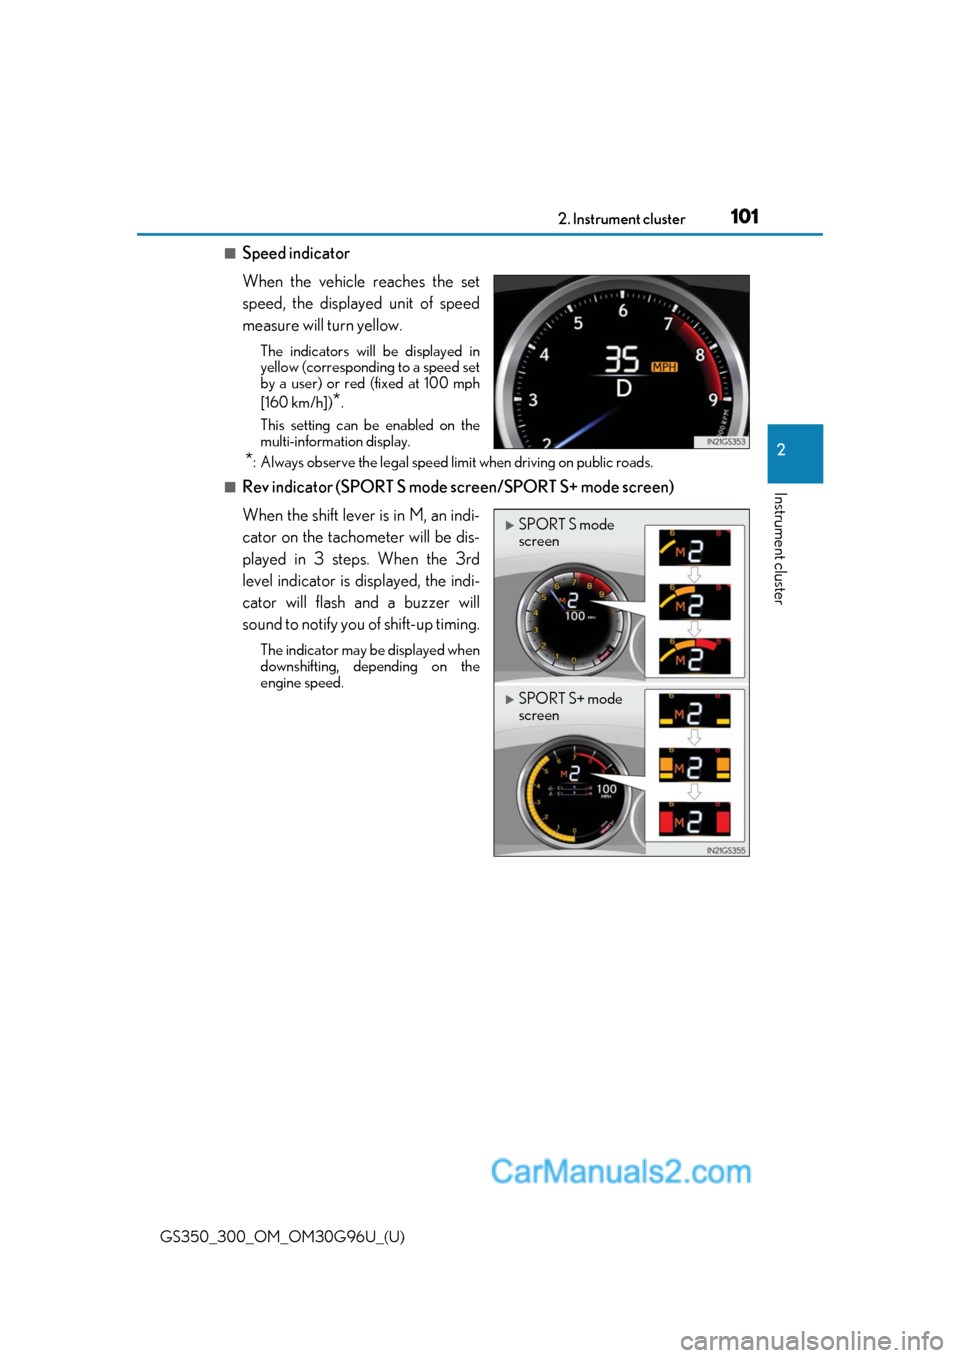 Lexus GS300 2019 User Guide GS350_300_OM_OM30G96U_(U)
1012. Instrument cluster
2
Instrument cluster
■Speed indicator
When the vehicle reaches the set
speed, the displayed unit of speed
measure will turn yellow.
The indicators 